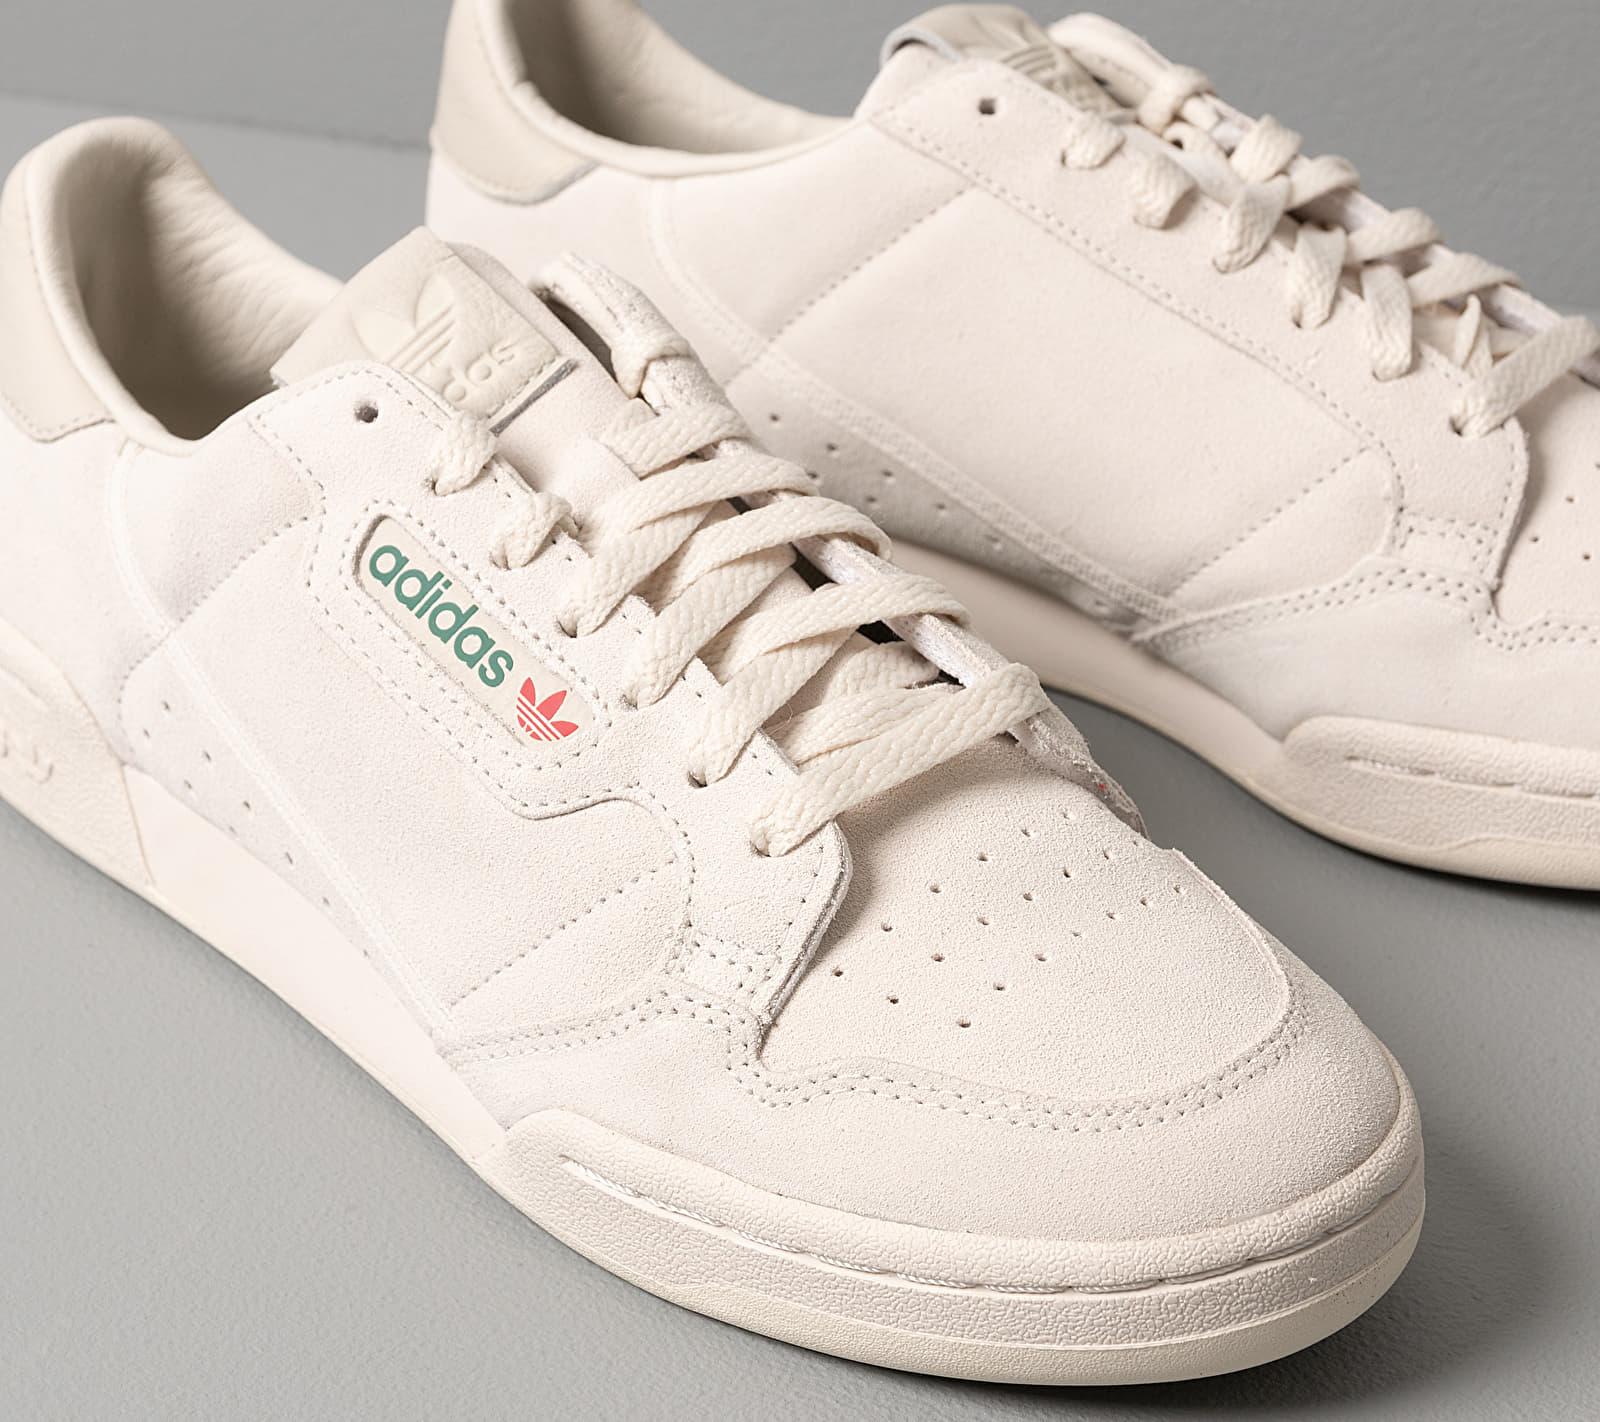 adidas Originals Adidas Continental 80 Raw White/ Raw White/ Off White in  Brown for Men - Lyst